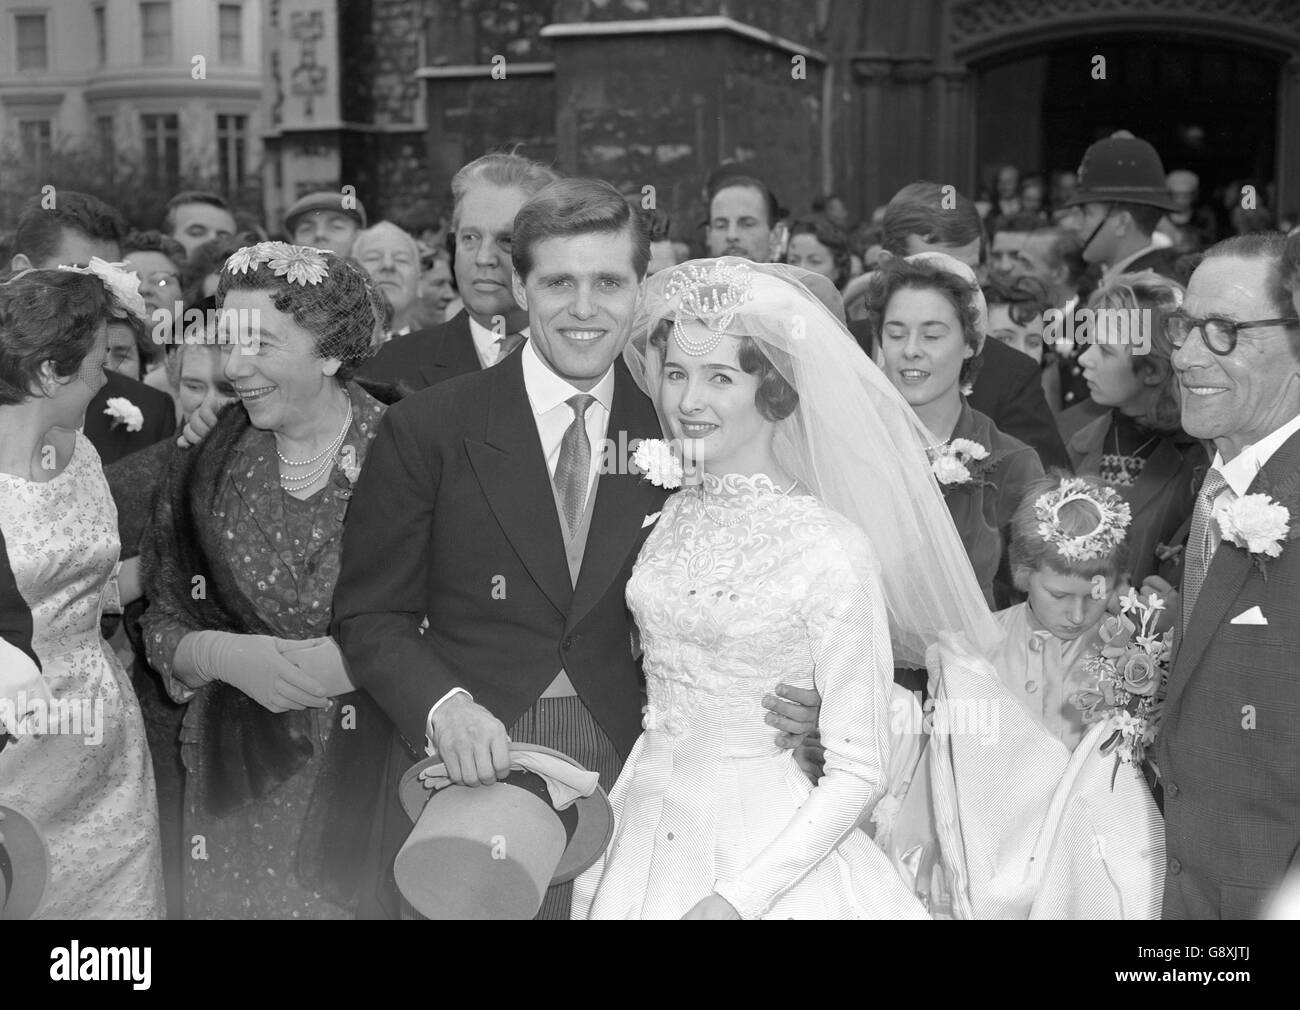 Singer Ronnie Carroll with his bride Millicent Martin, 25, star of The Crooked Mile at the Cambridge Theatre, after their wedding at Holy Trinity Church in Paddington. Stock Photo